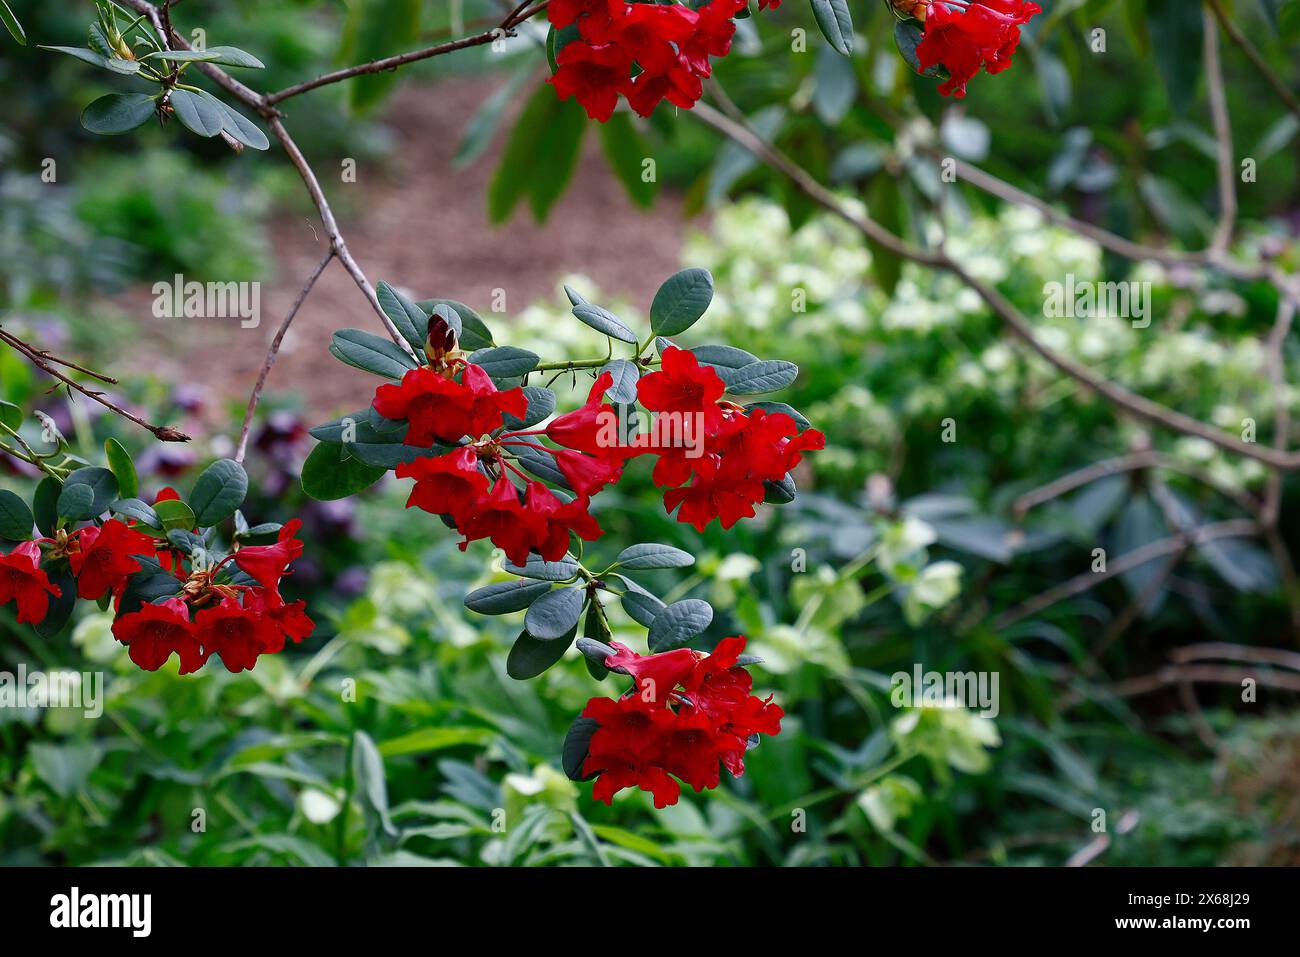 Closeup of the red flowers of the low growing compact spring flowering garden shrub rhododendron elizabeth hobbie. Stock Photo